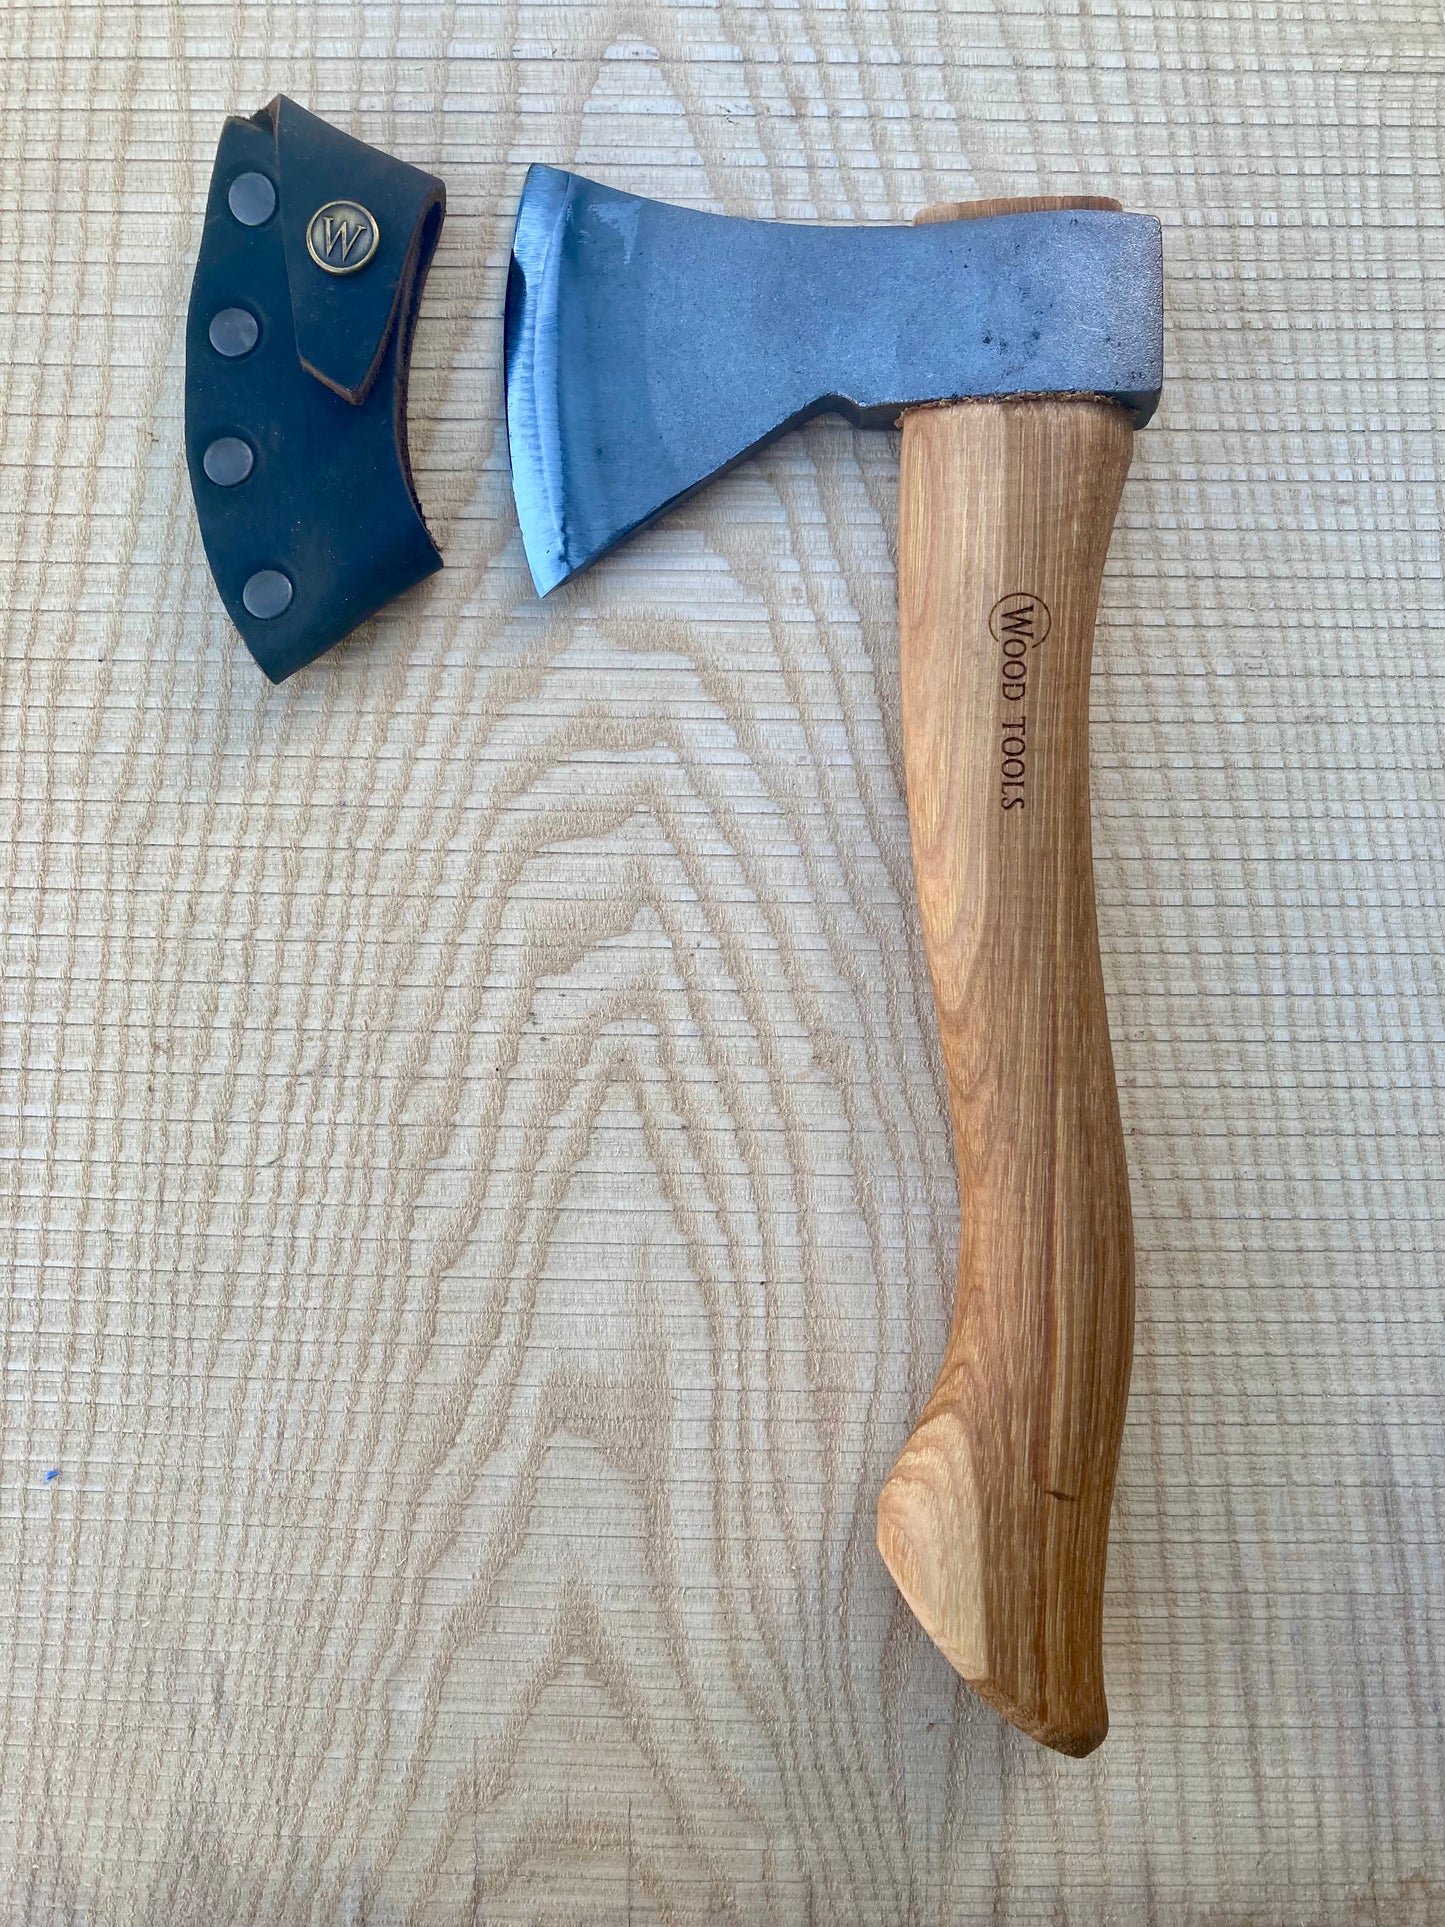 Wood Tools - Carving Axe with Sheath